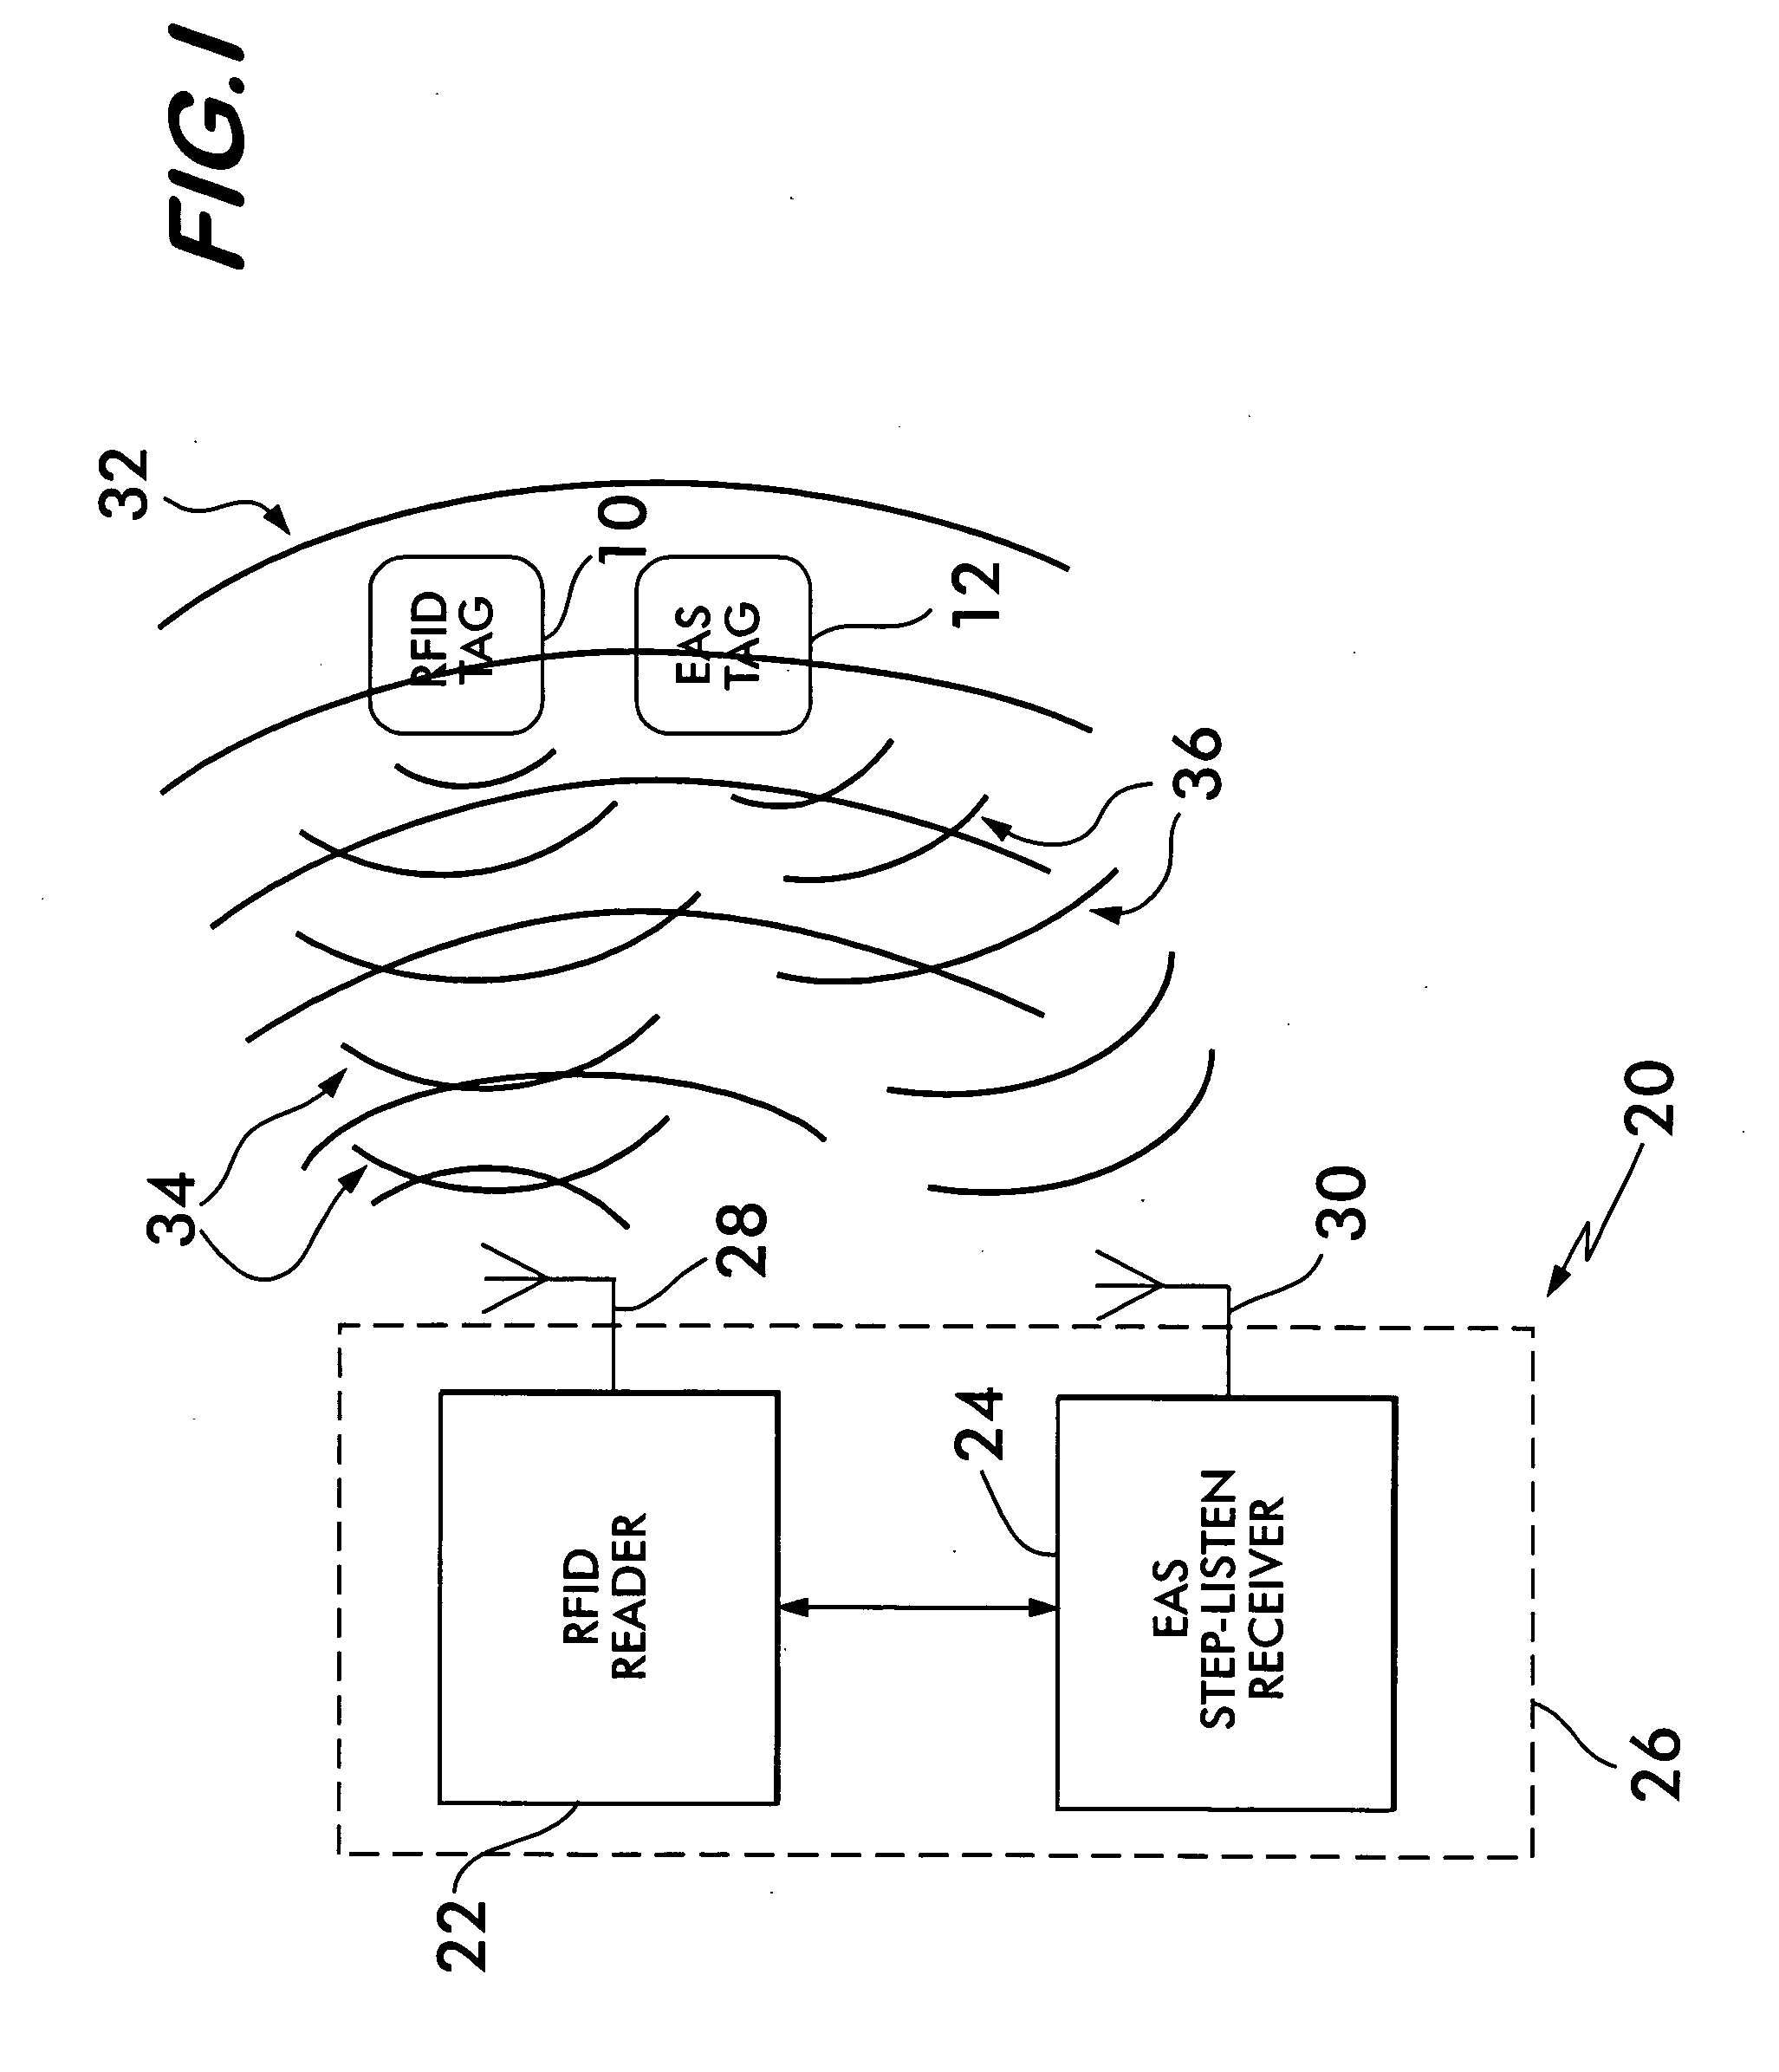 System and method for detecting EAS/RFID tags using step listen